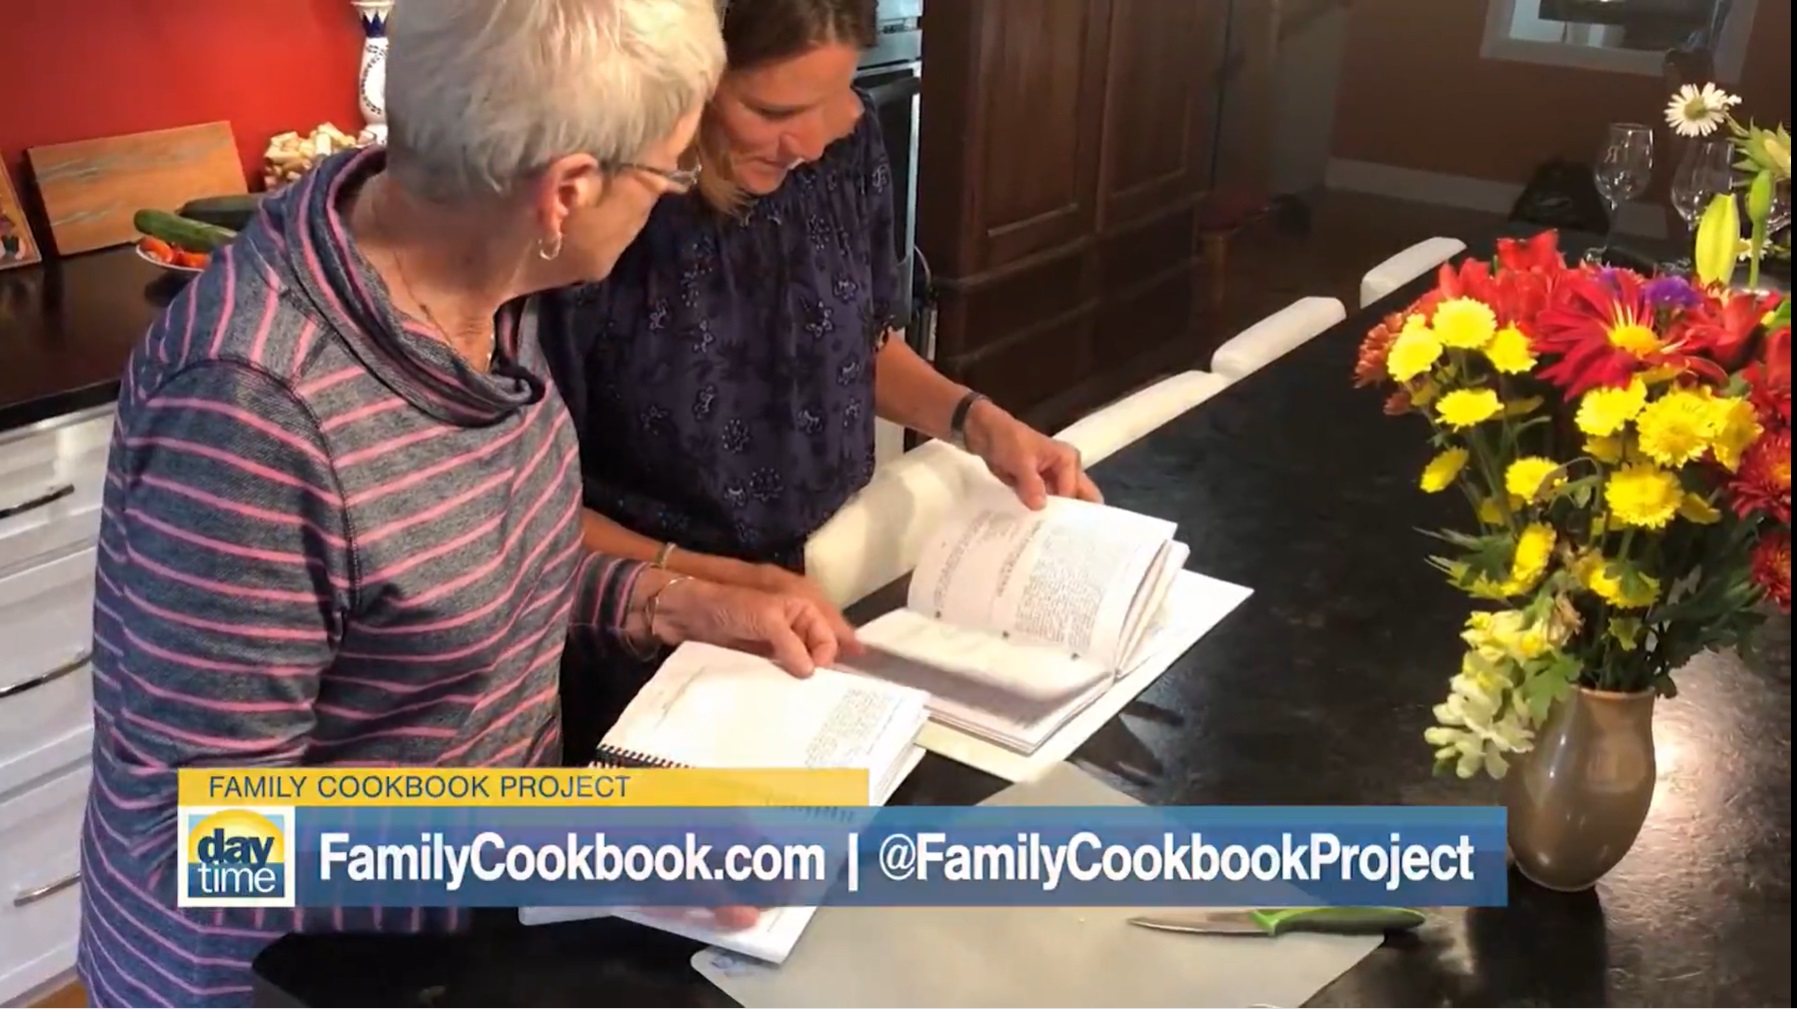 Family Cookbook Project Is "Marvelous For Mother's Day"